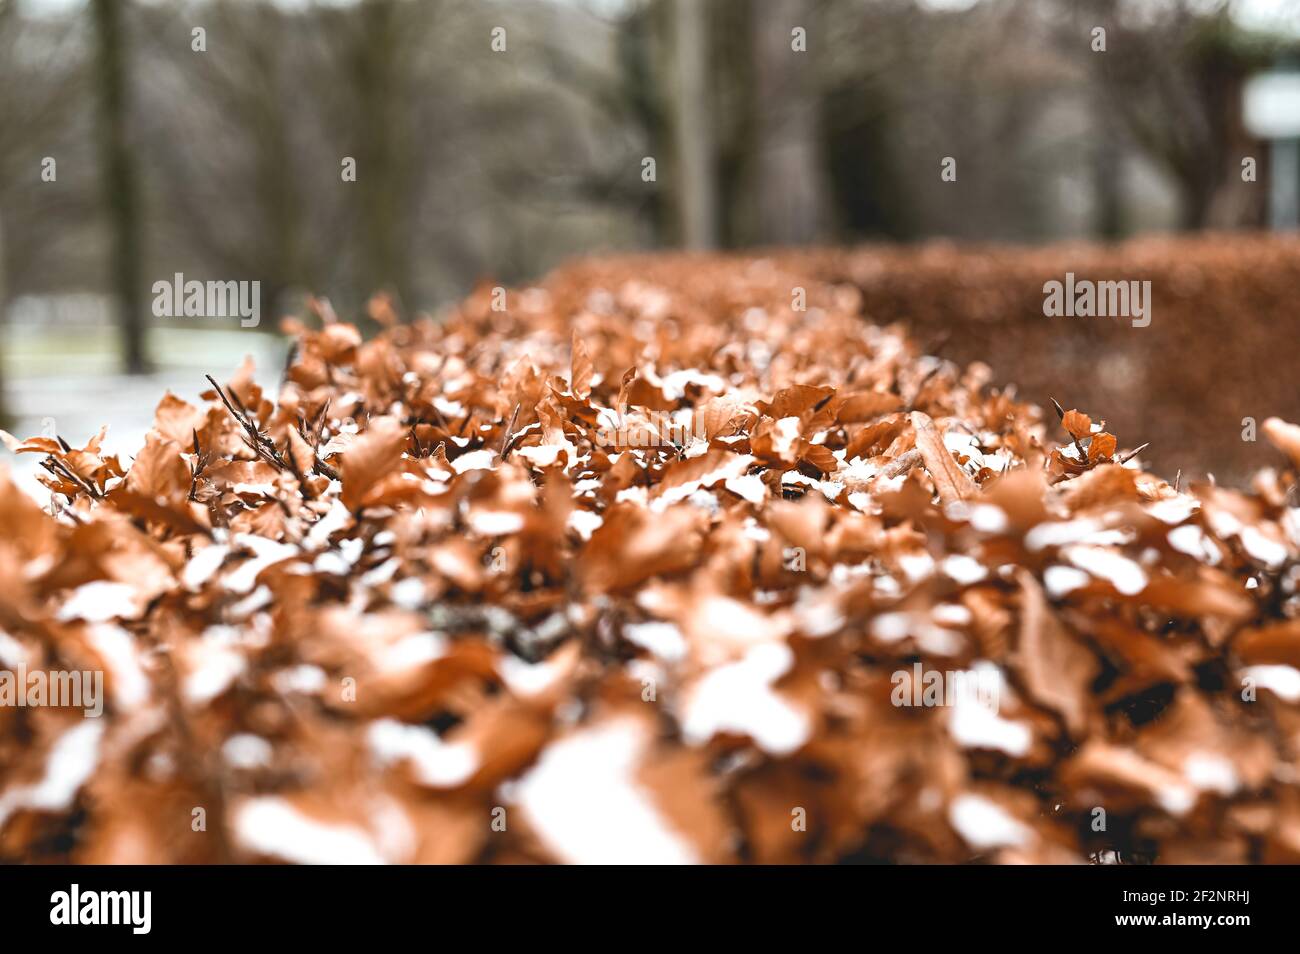 The Hinübersche garden in Hannover with snow at winter time Stock Photo